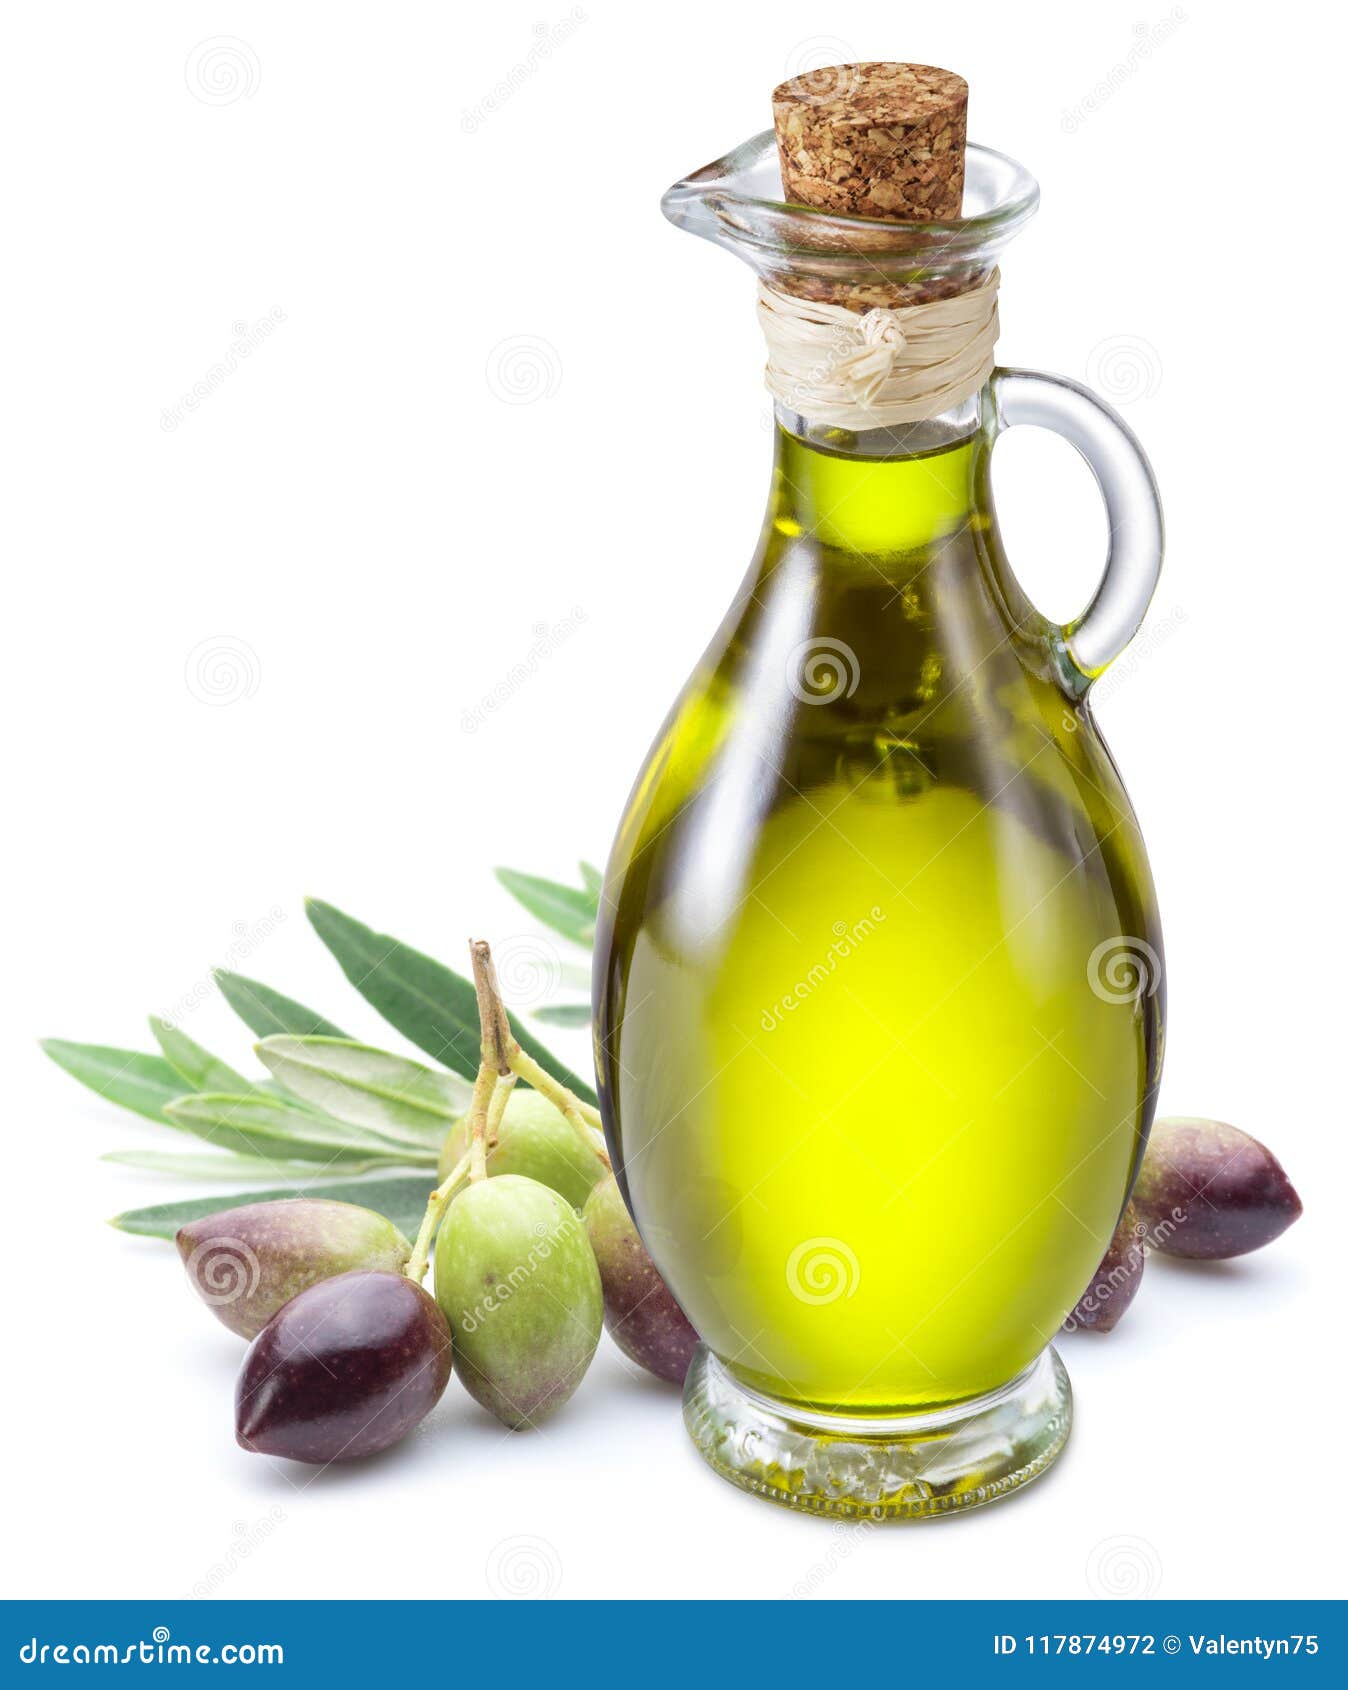 bottle of olive oil and olive berries on white background.